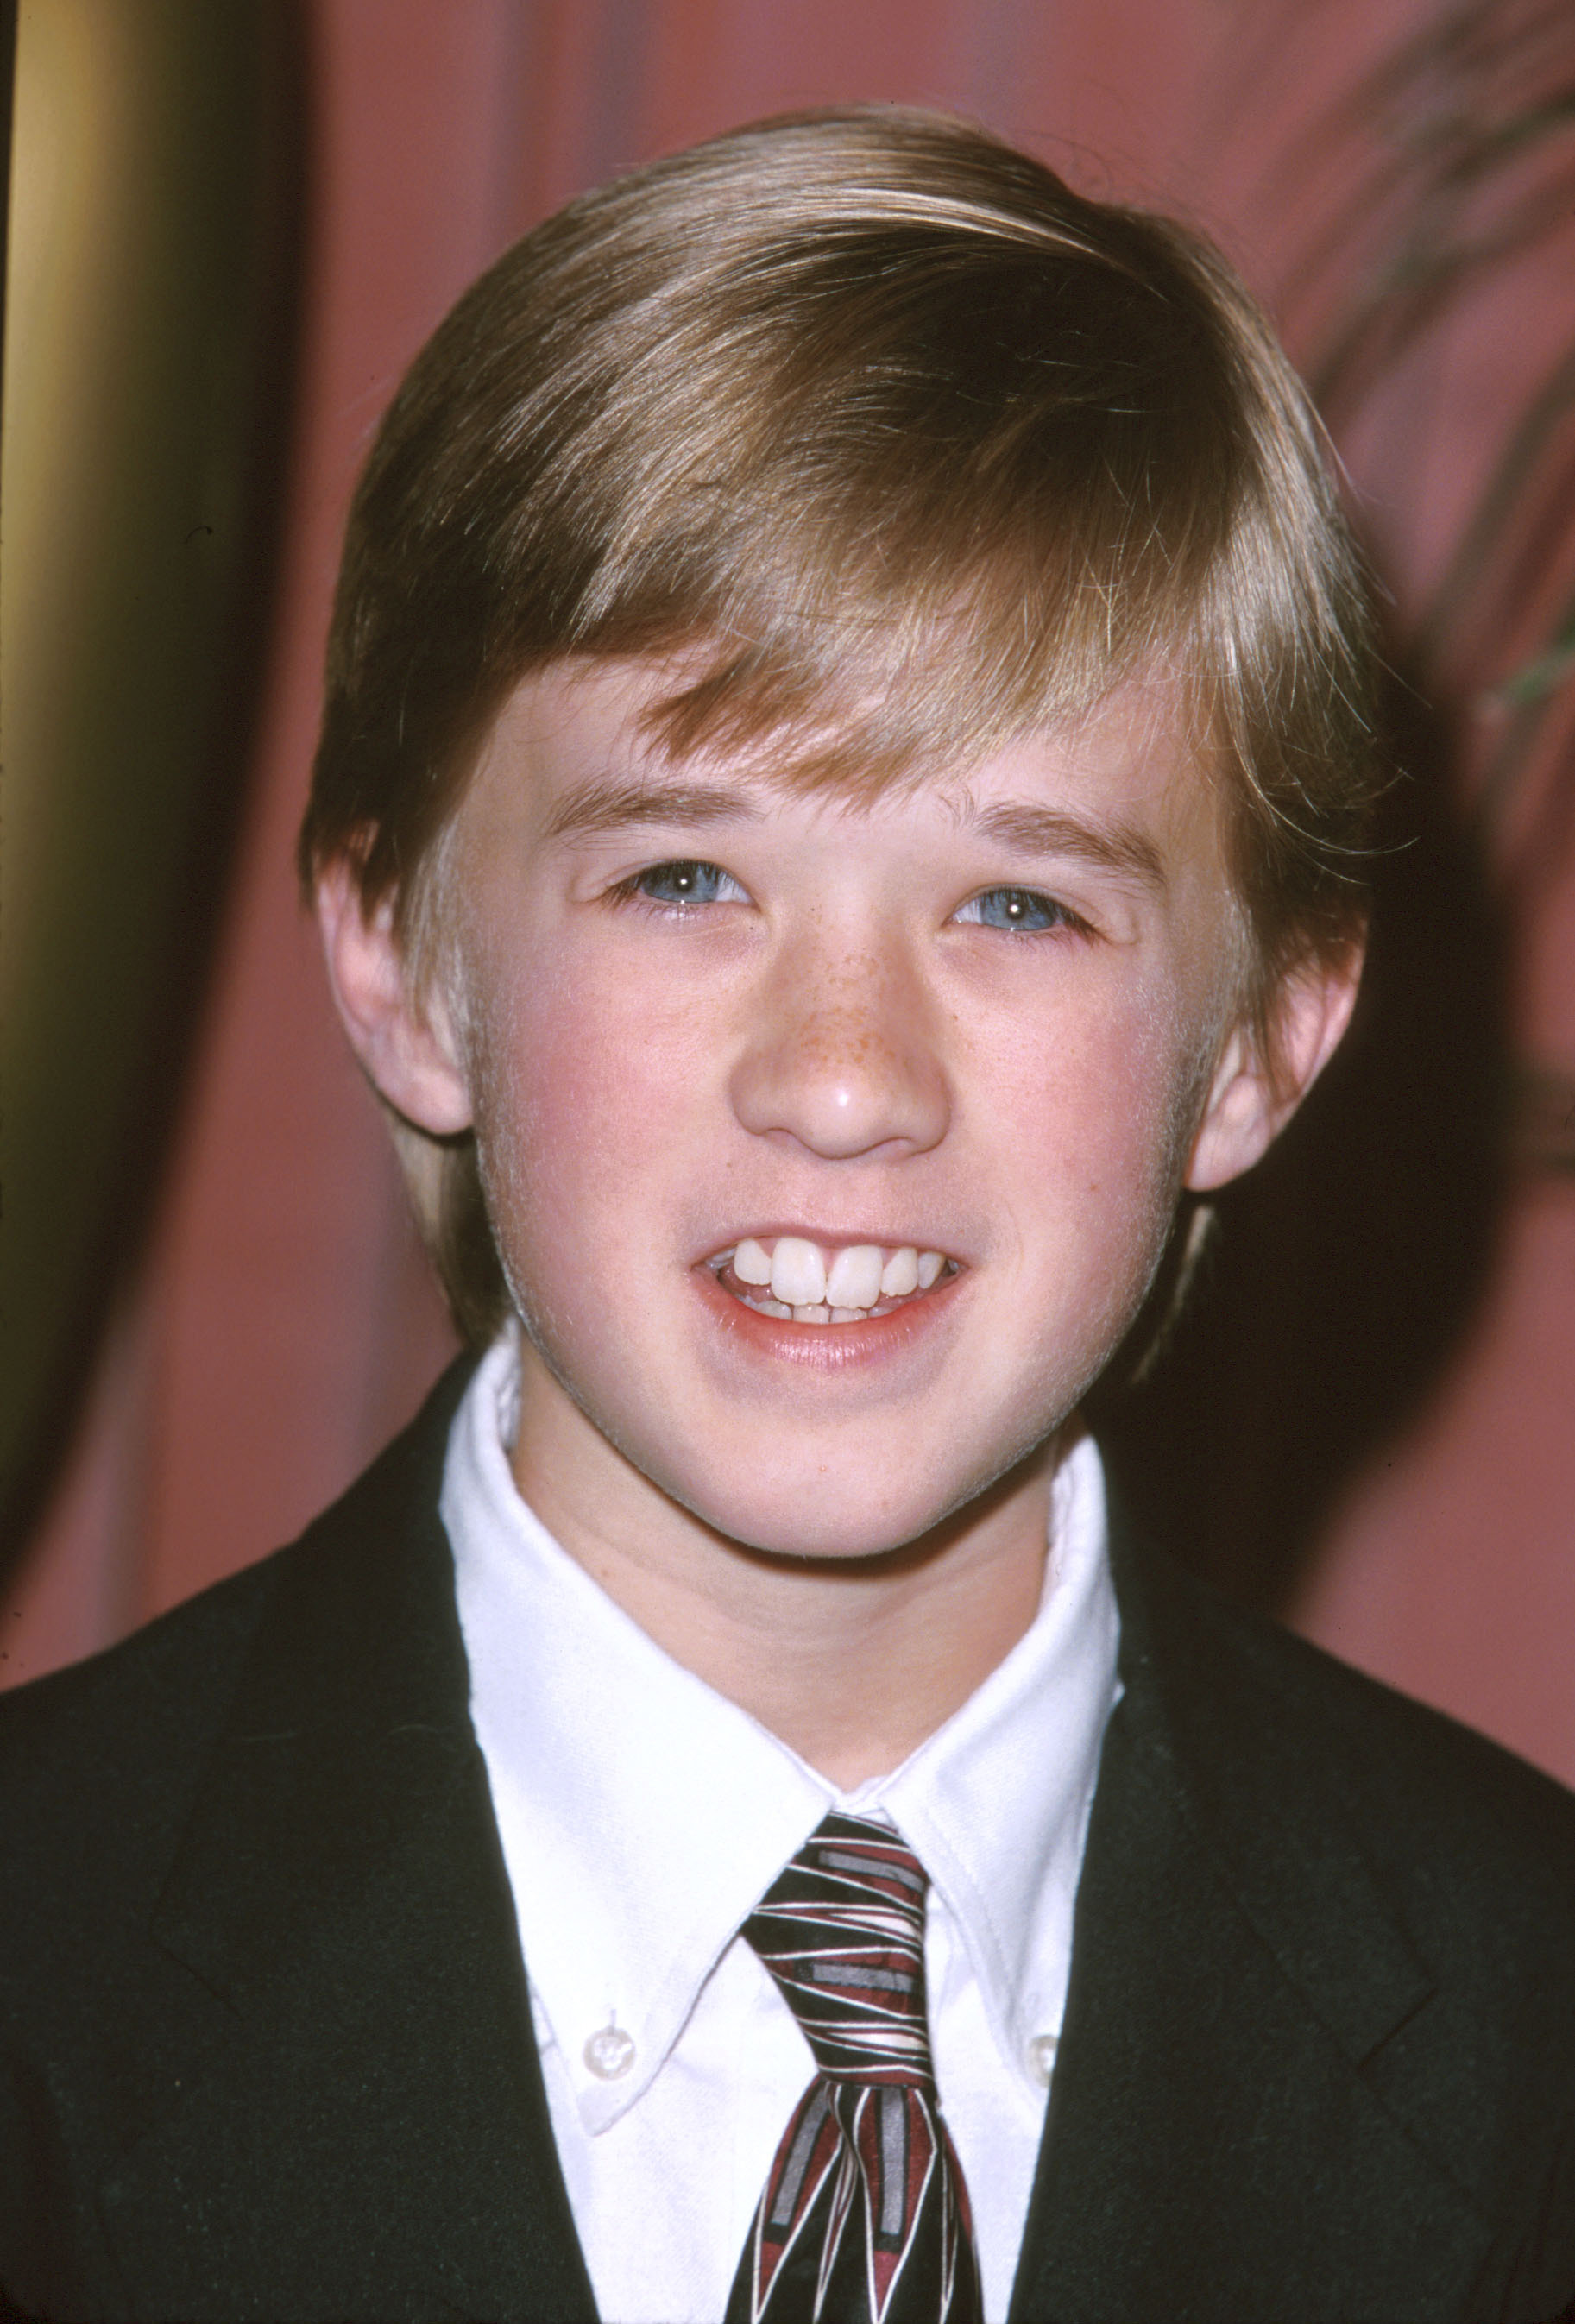 Haley Osment during The 72nd Annual Academy Awards - Nominees Luncheon at Beverly Hilton Hotel on March 13, 2000 in Beverly Hills, California. | Source: Getty Images